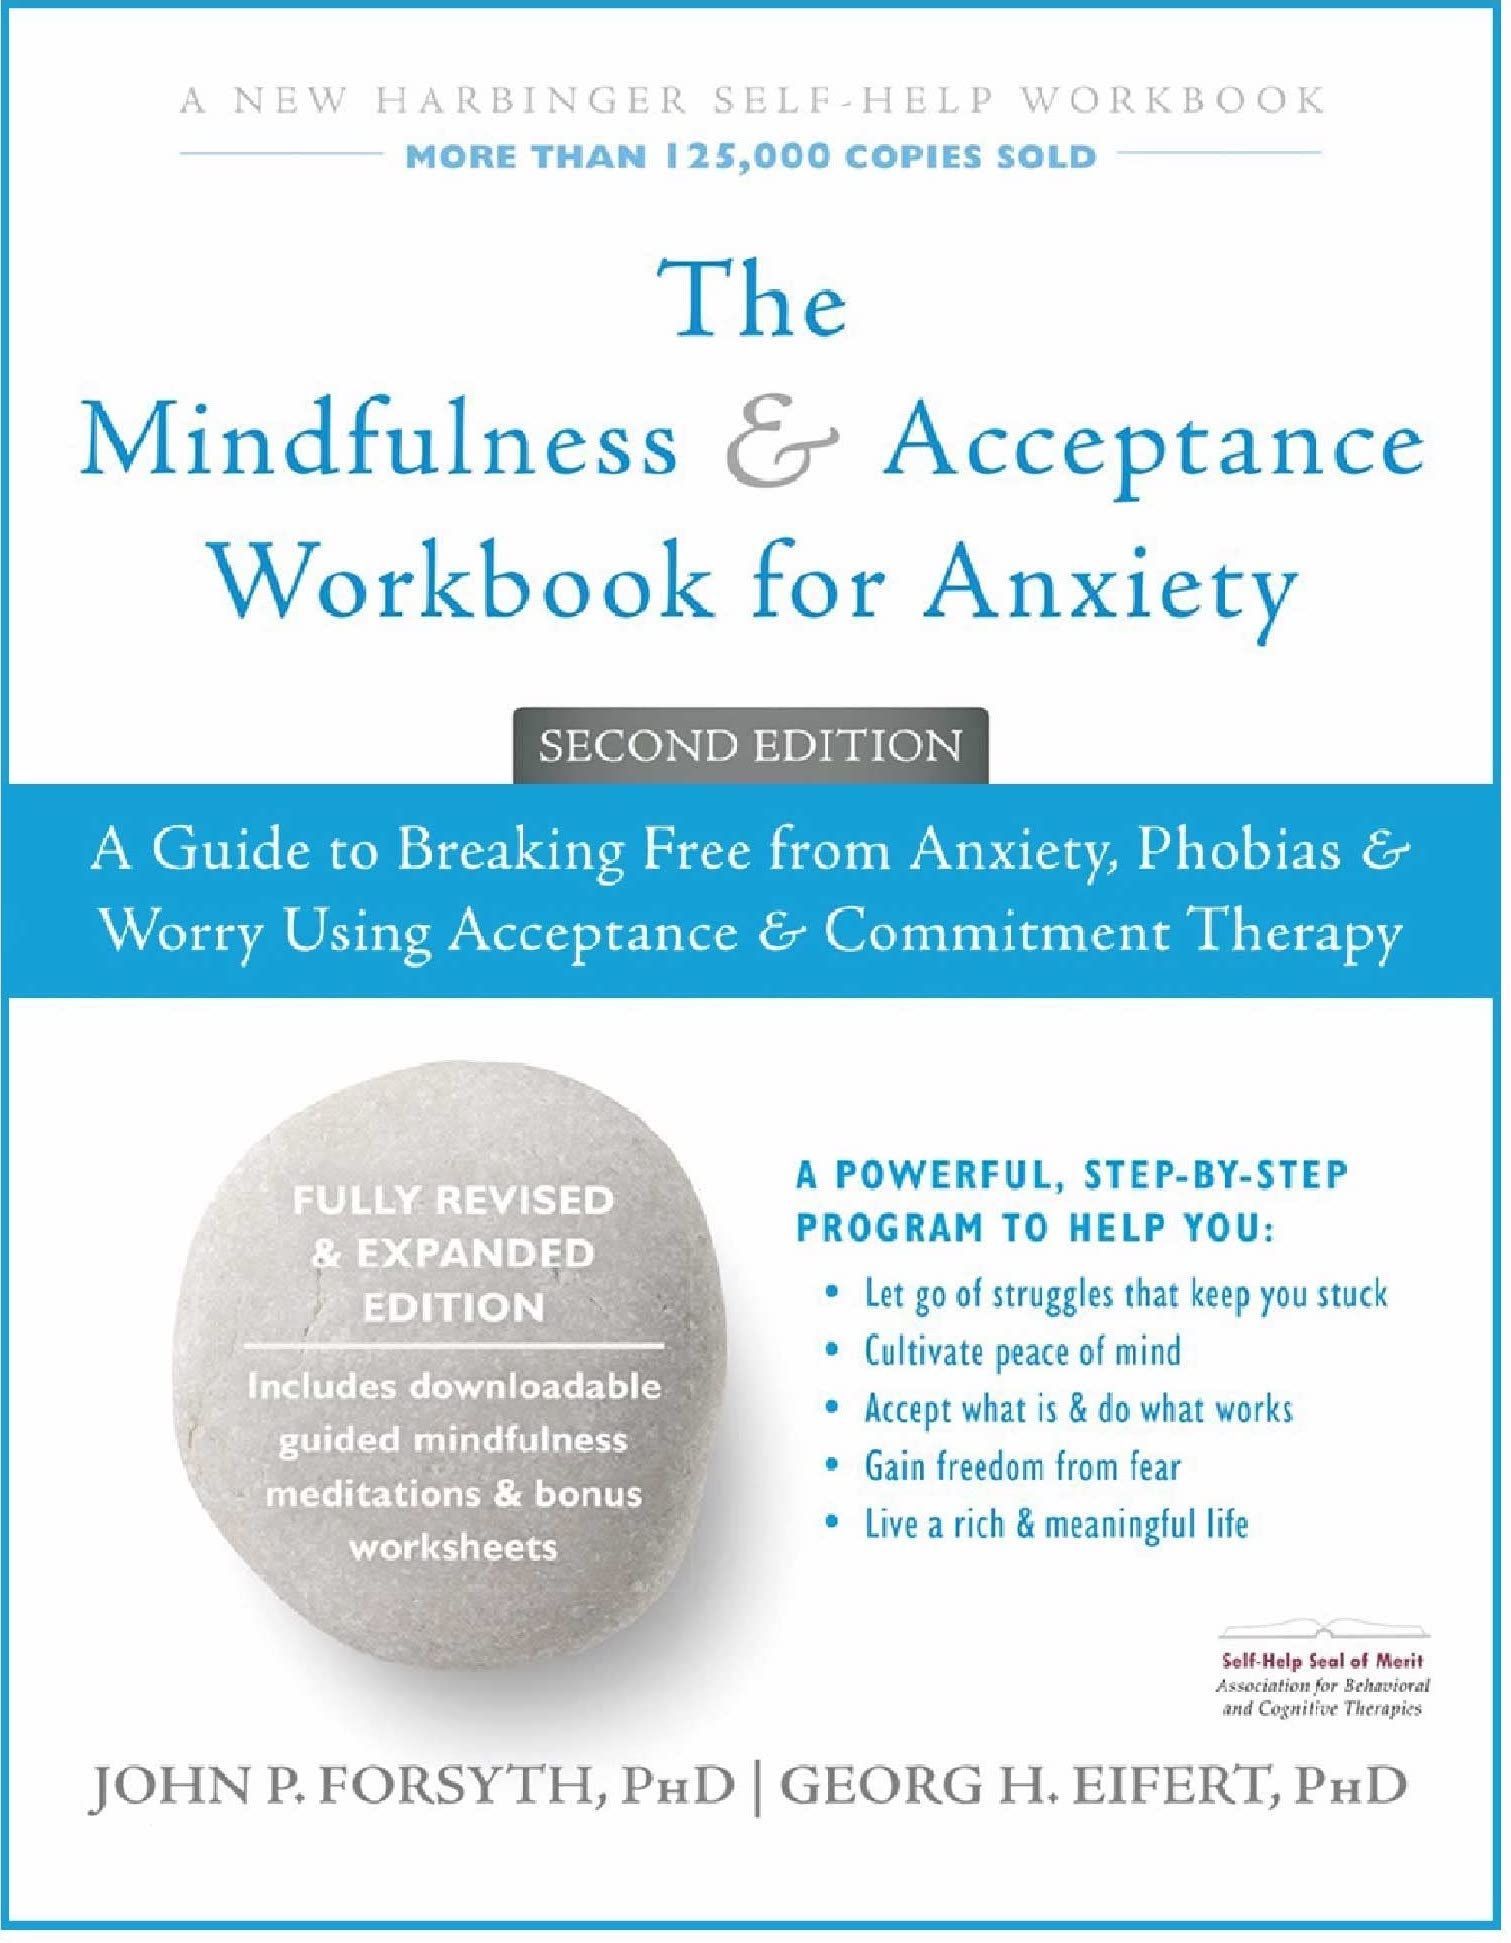 The Mindfulness & Acceptance Workbook for Anxiety